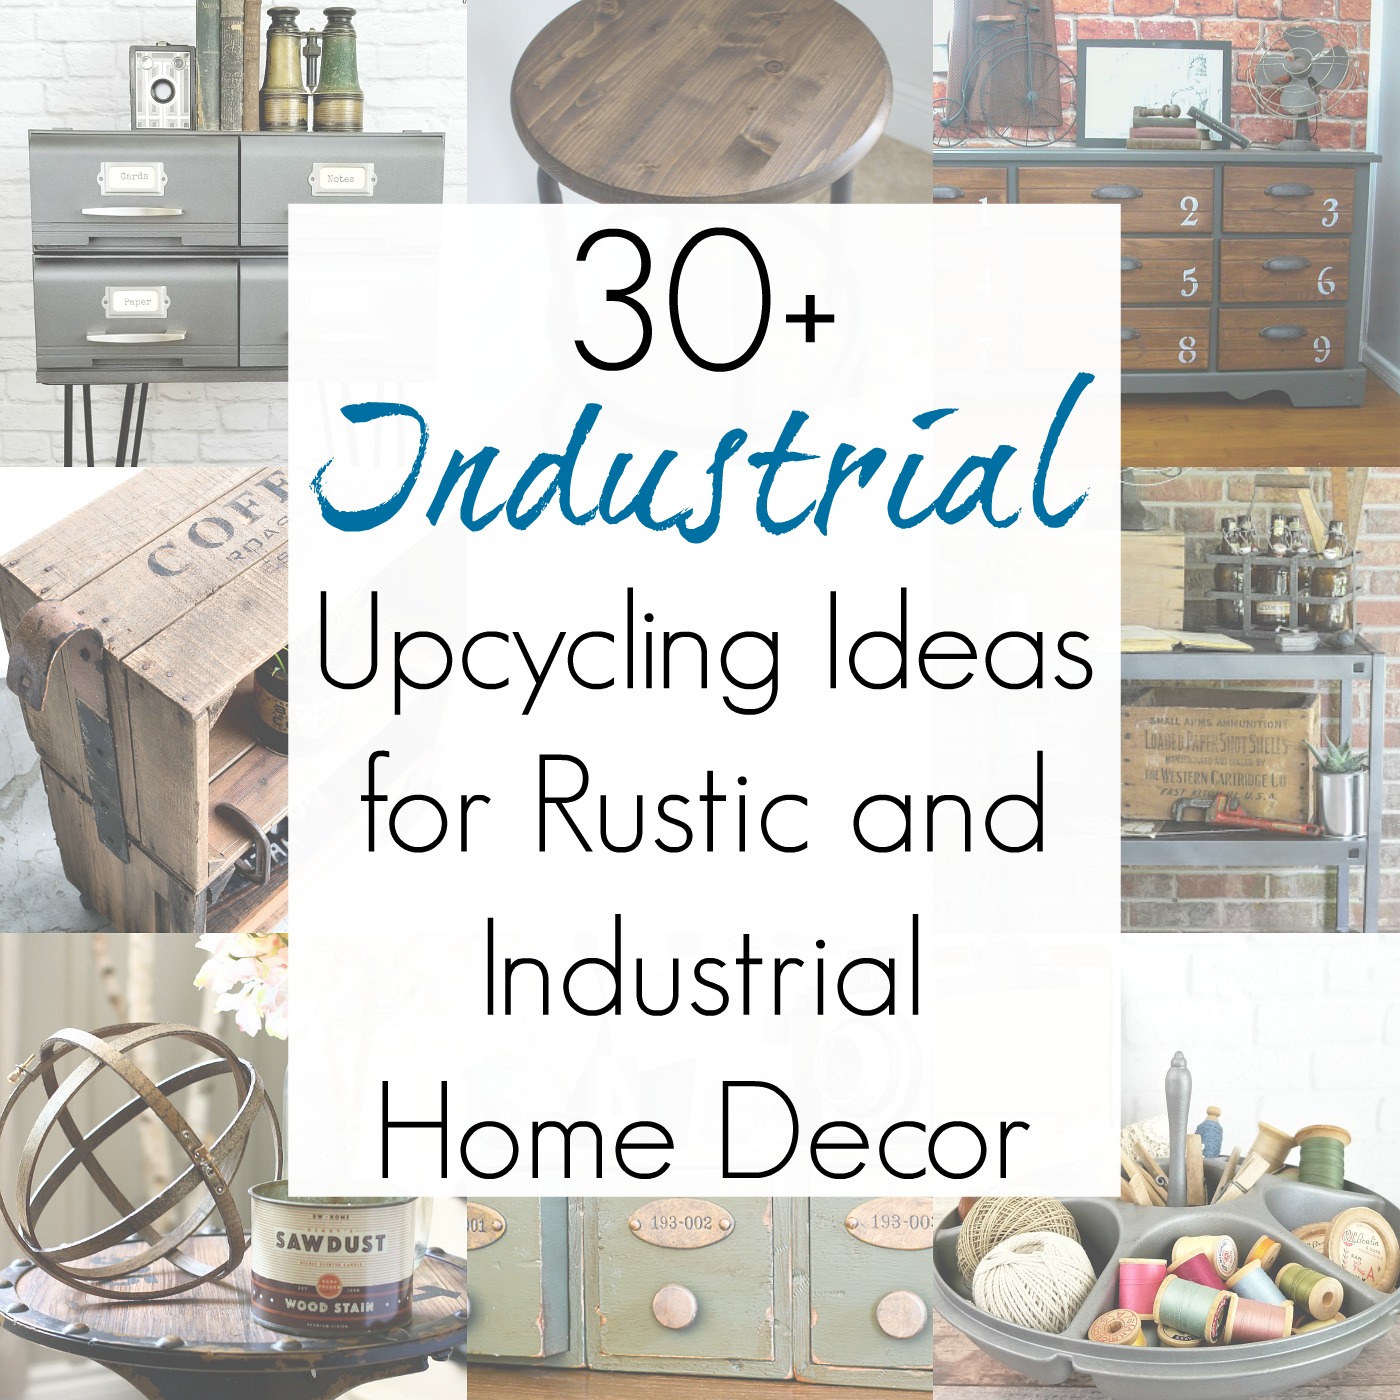 Upcycling ideas and repurposed projects for industrial decor or rustic home decor in the industrial style